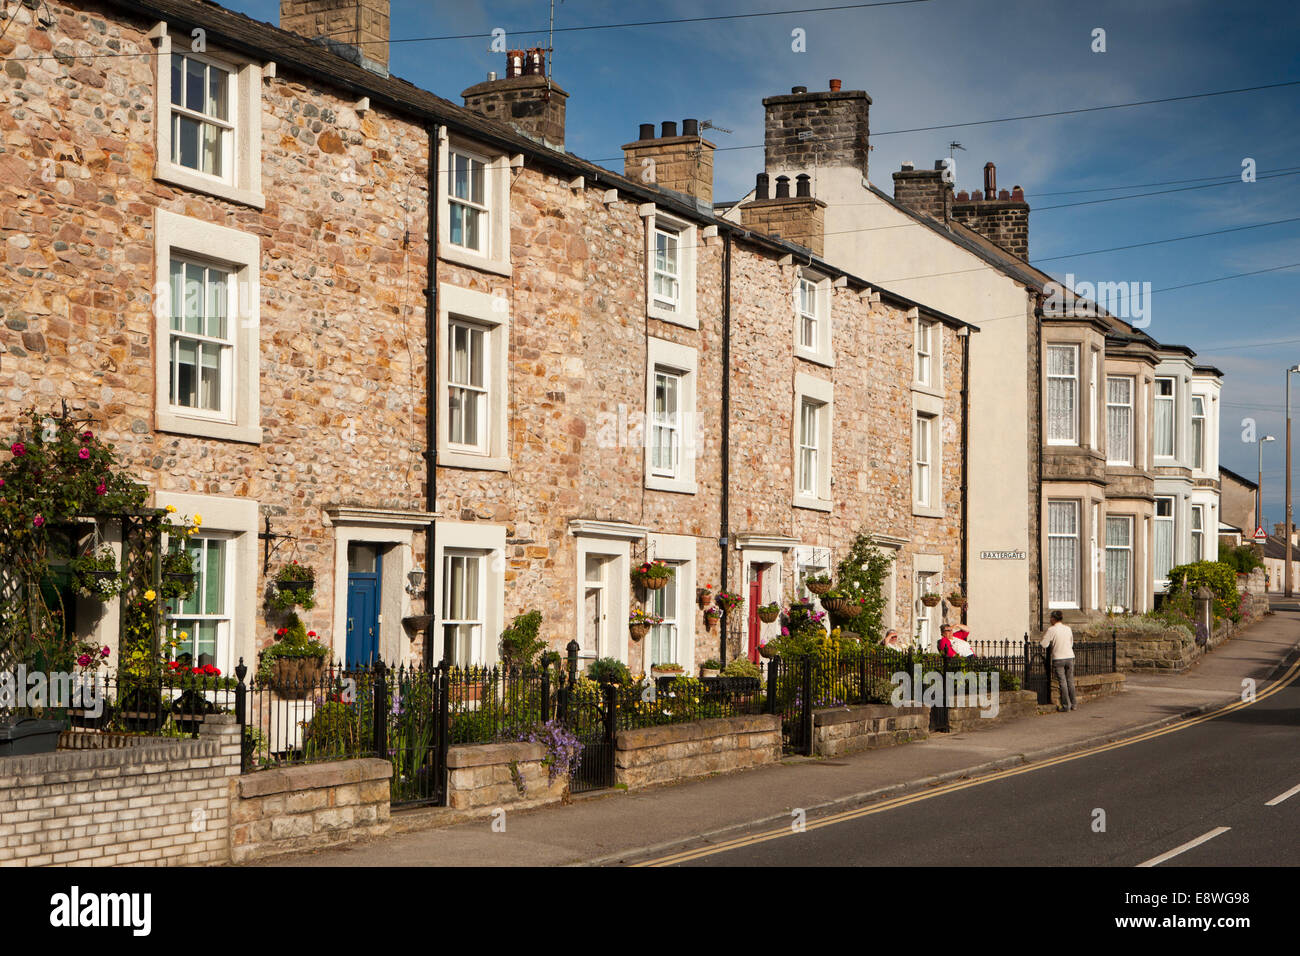 UK, England, Lancashire, Morecambe, Lord Street, old houses in conservation area Stock Photo